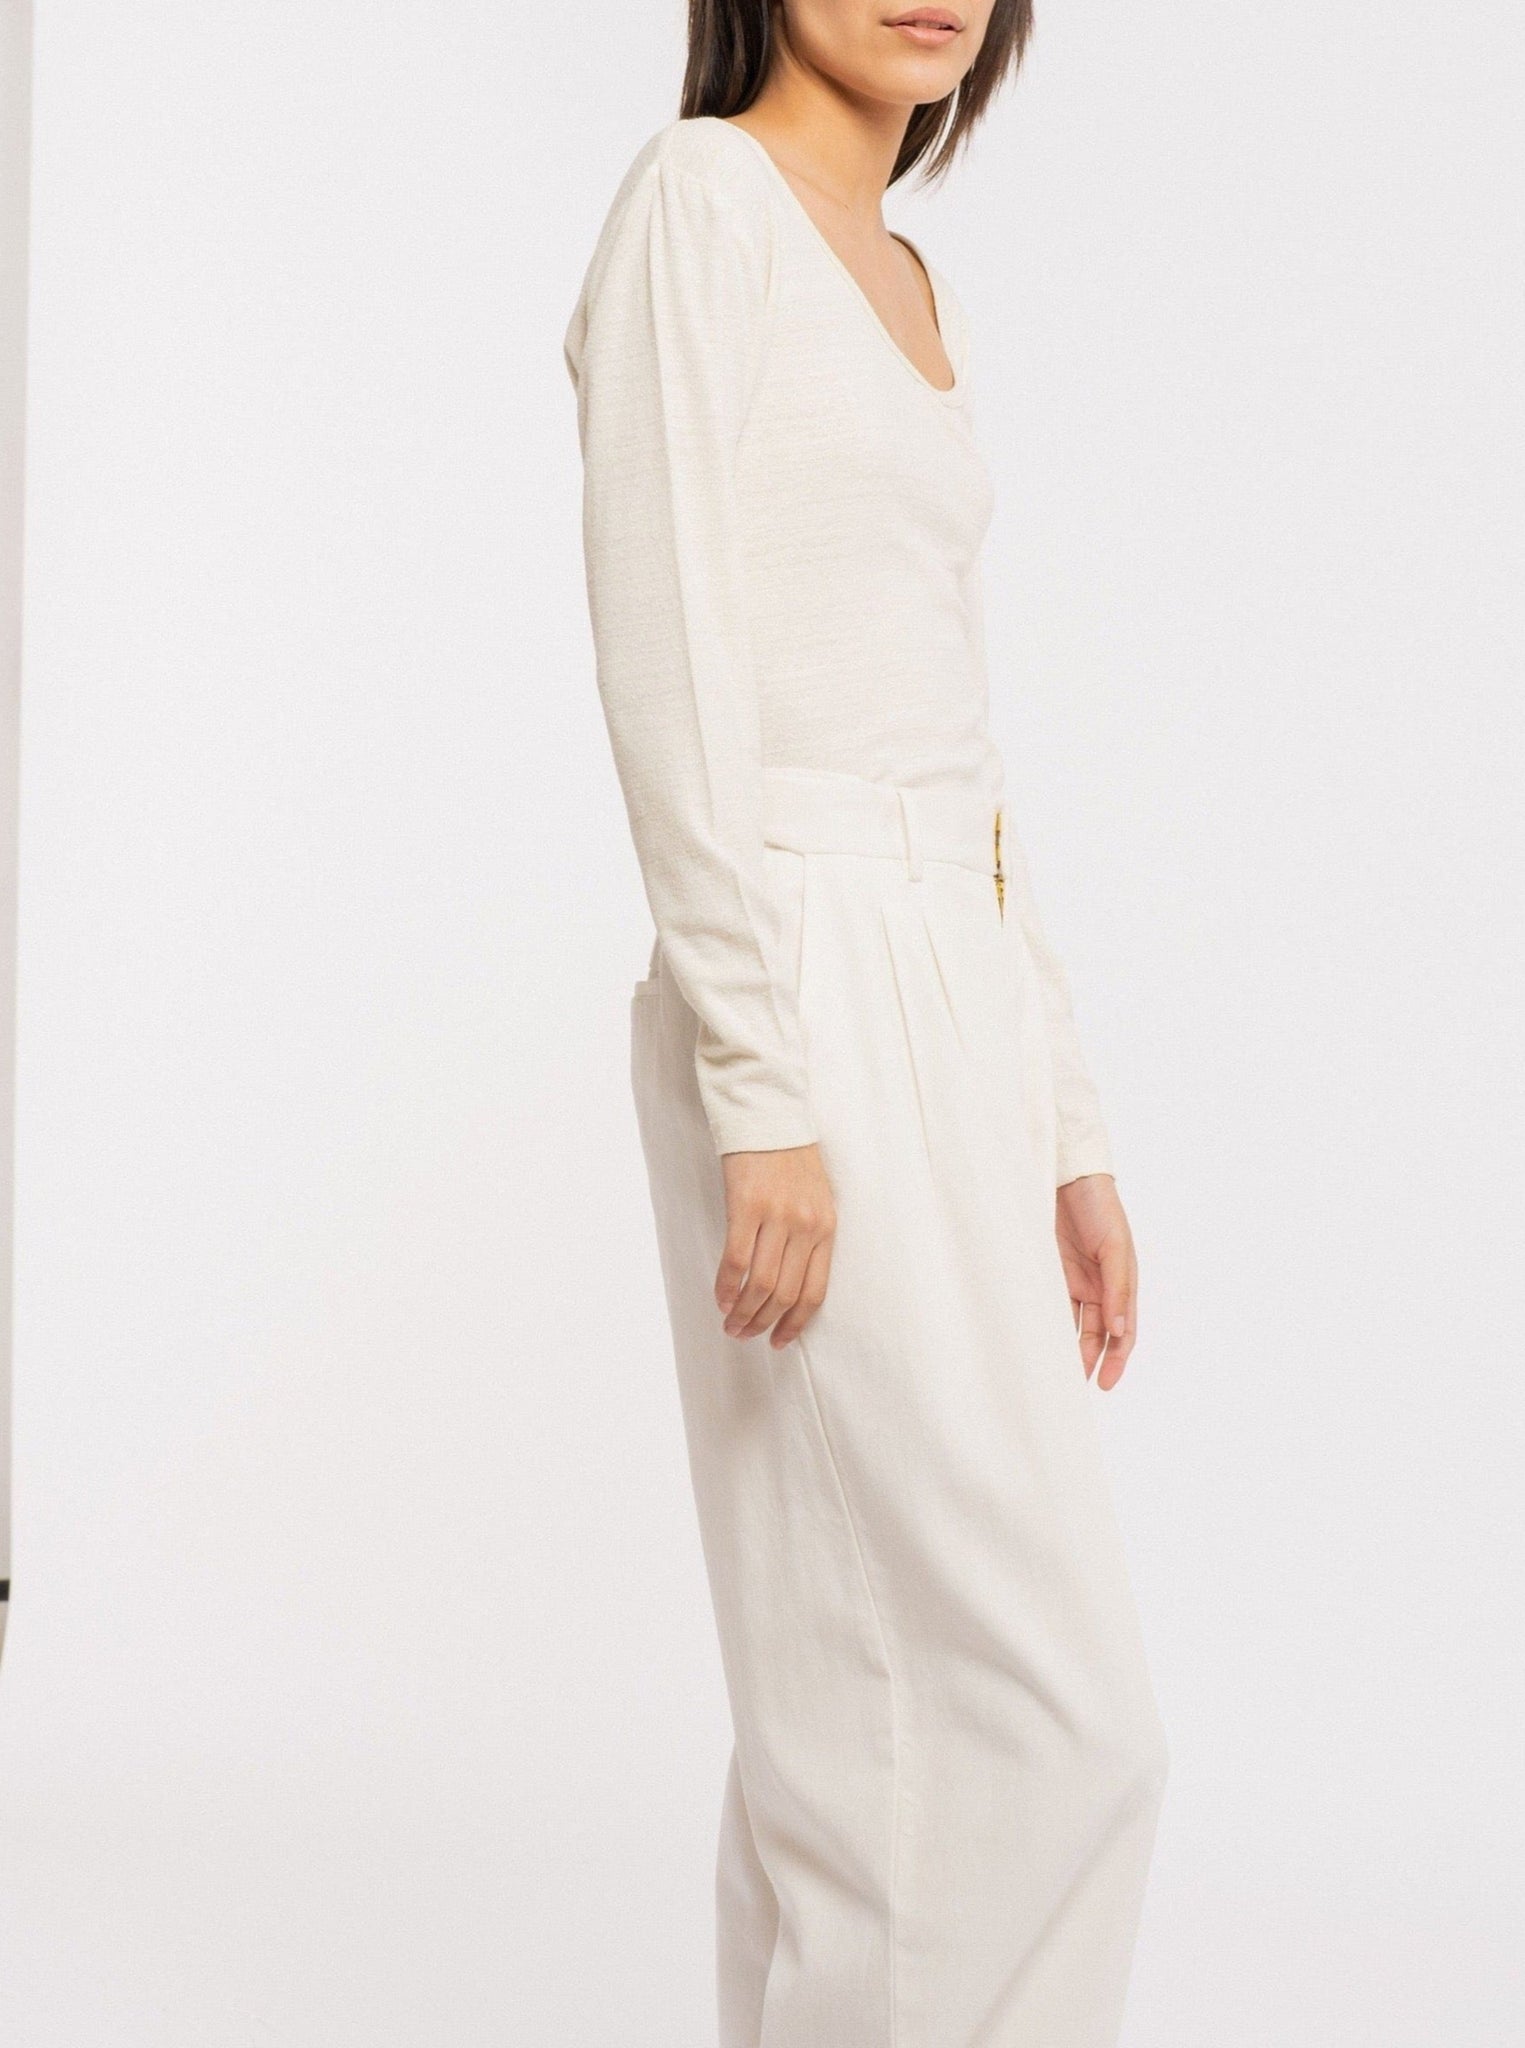 The model is wearing a white blouse with a Scoop Neck Tee - Ivory and wide leg pants made from sustainable silk noil.